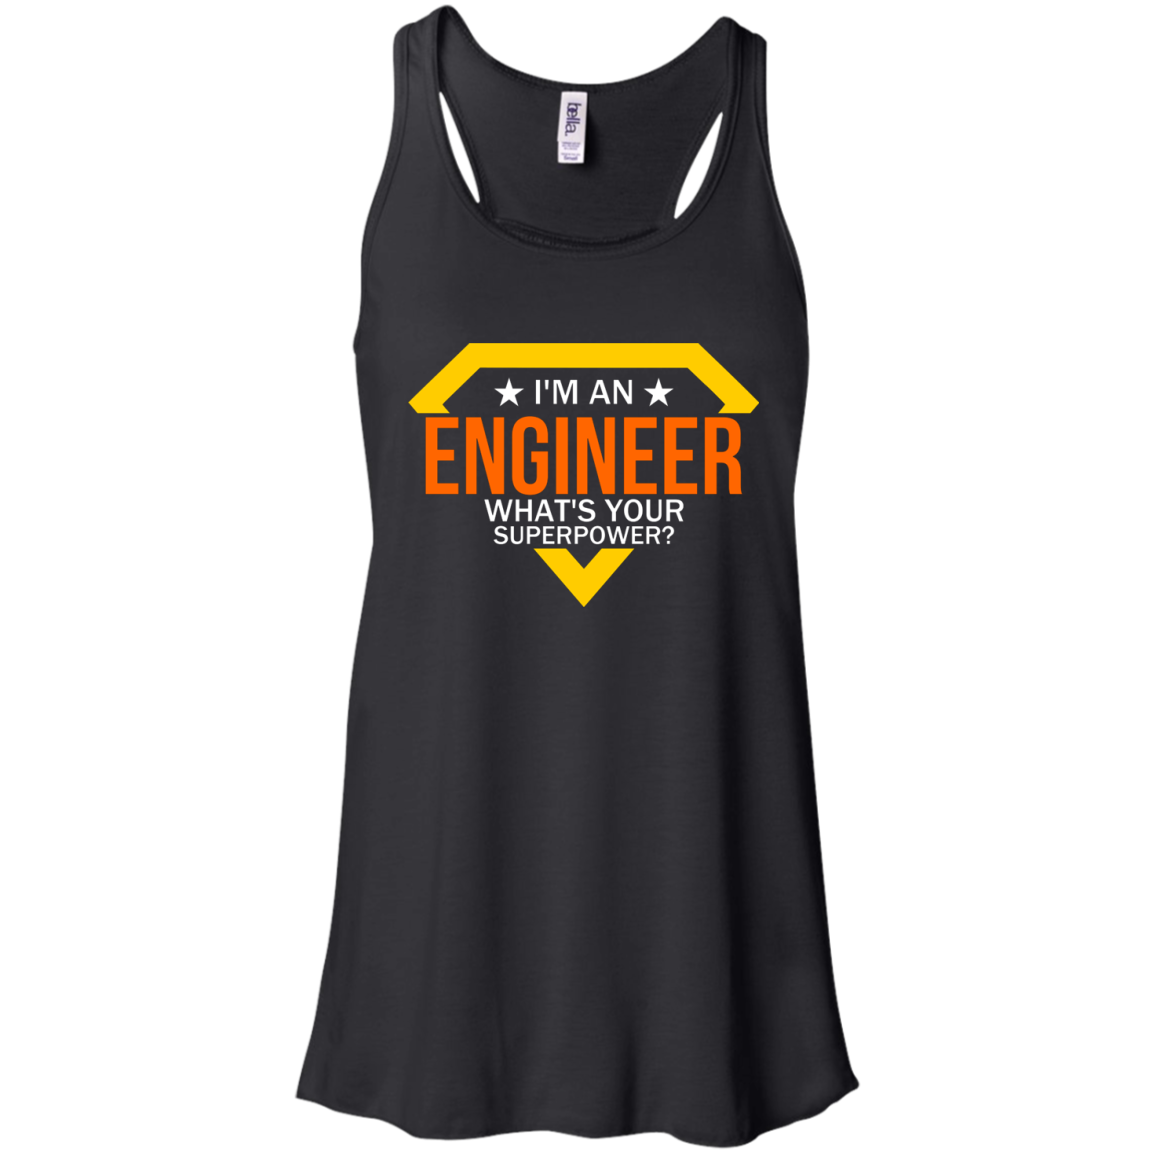 I'm An Engineer - What's Your Super Power?